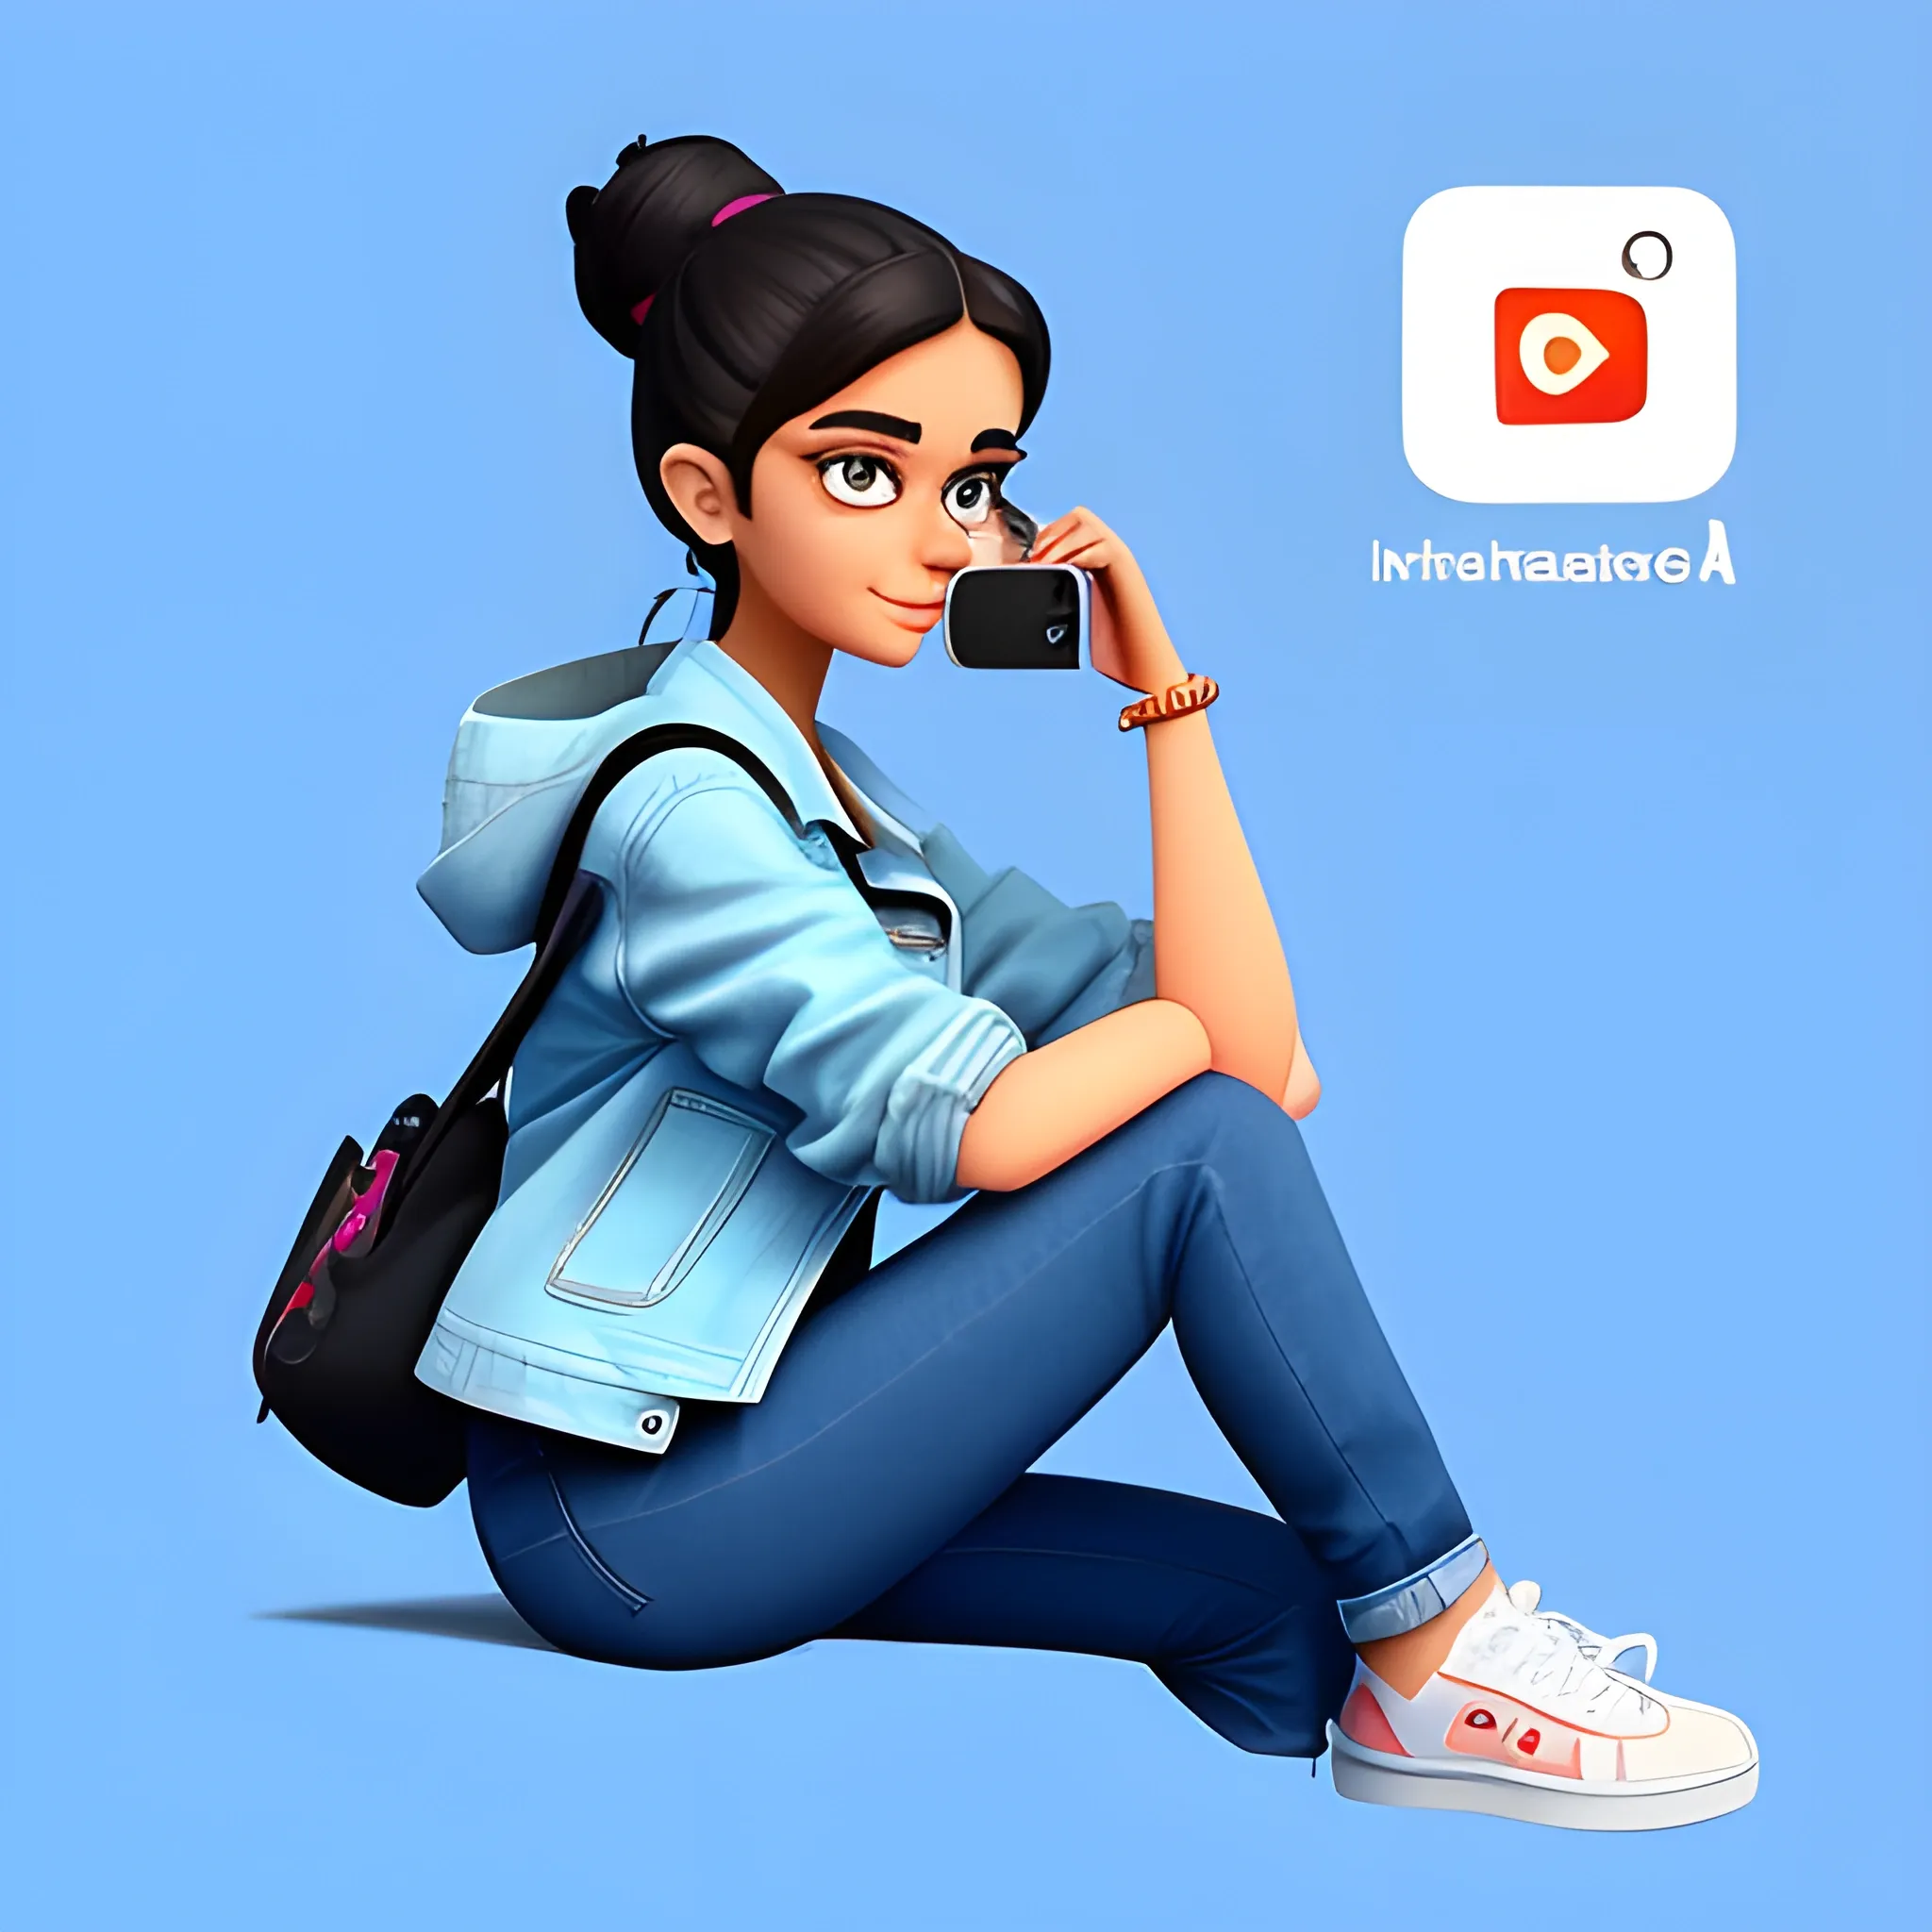 Create a 3D illustration of an animated character sitting casually on top of a social media logo "Instagram".A female character.The character must wear casual modern clothing such as jeans jacket and sneakers shoes. The background of the image is a social media profile page with a user name "Itz_s_neha07" and a profile picture that match.